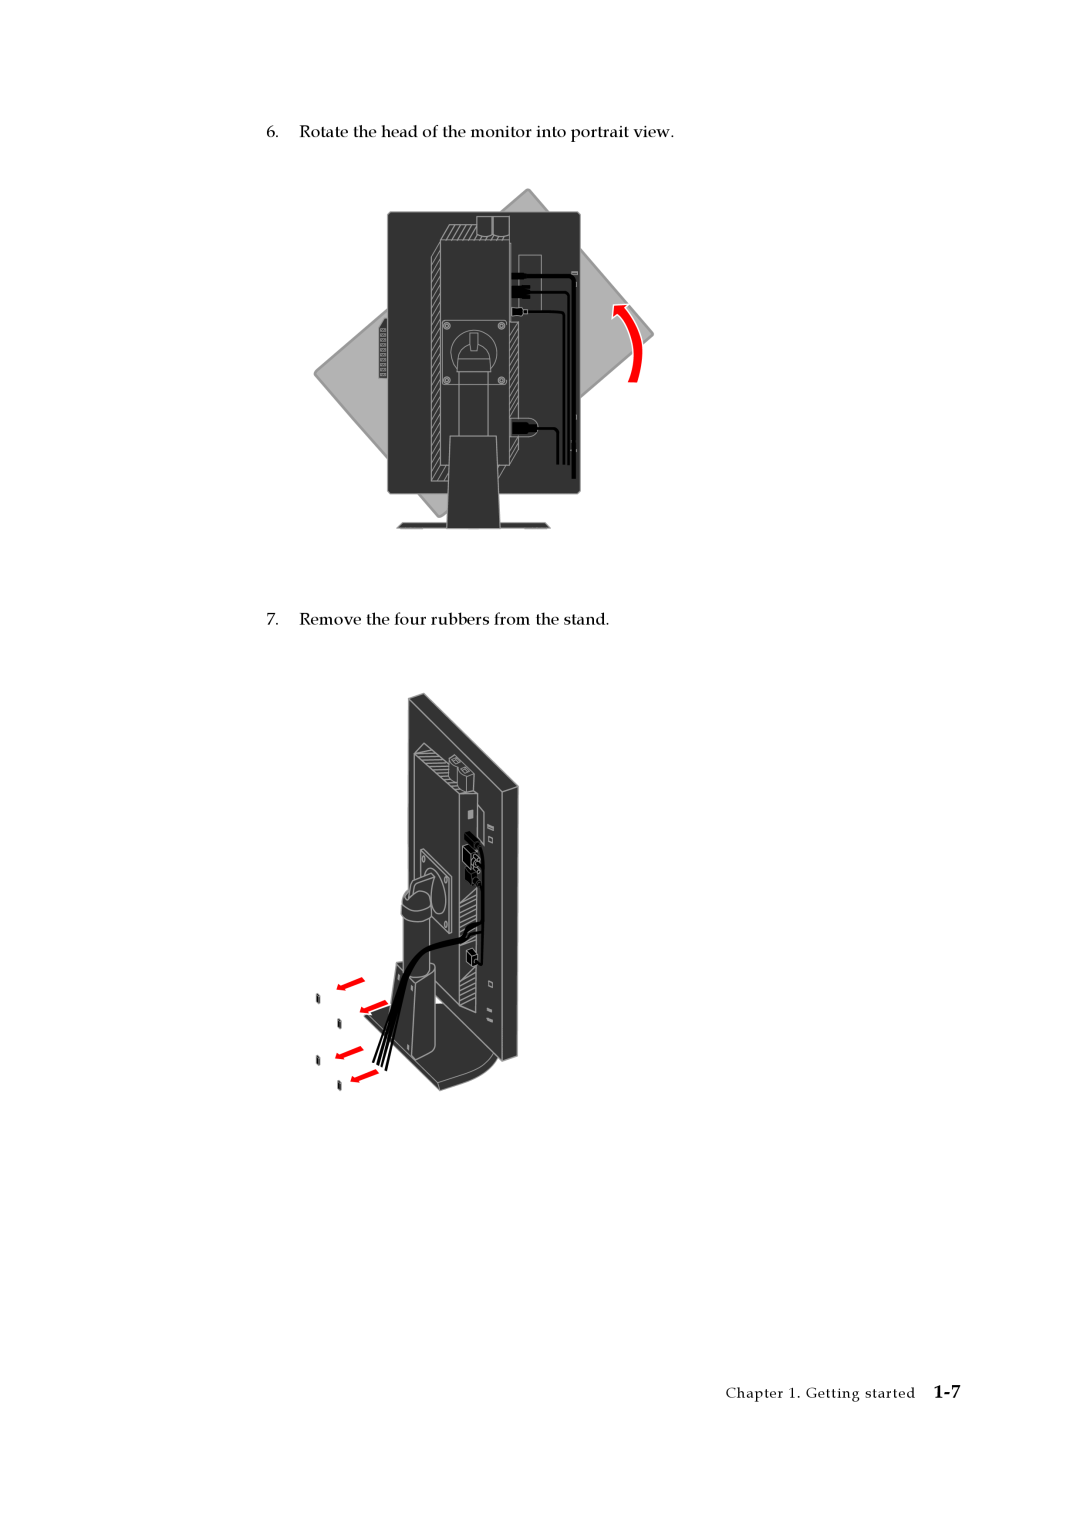 Lenovo 2578HB6 manual Rotate the head of the monitor into portrait view, Remove the four rubbers from the stand 